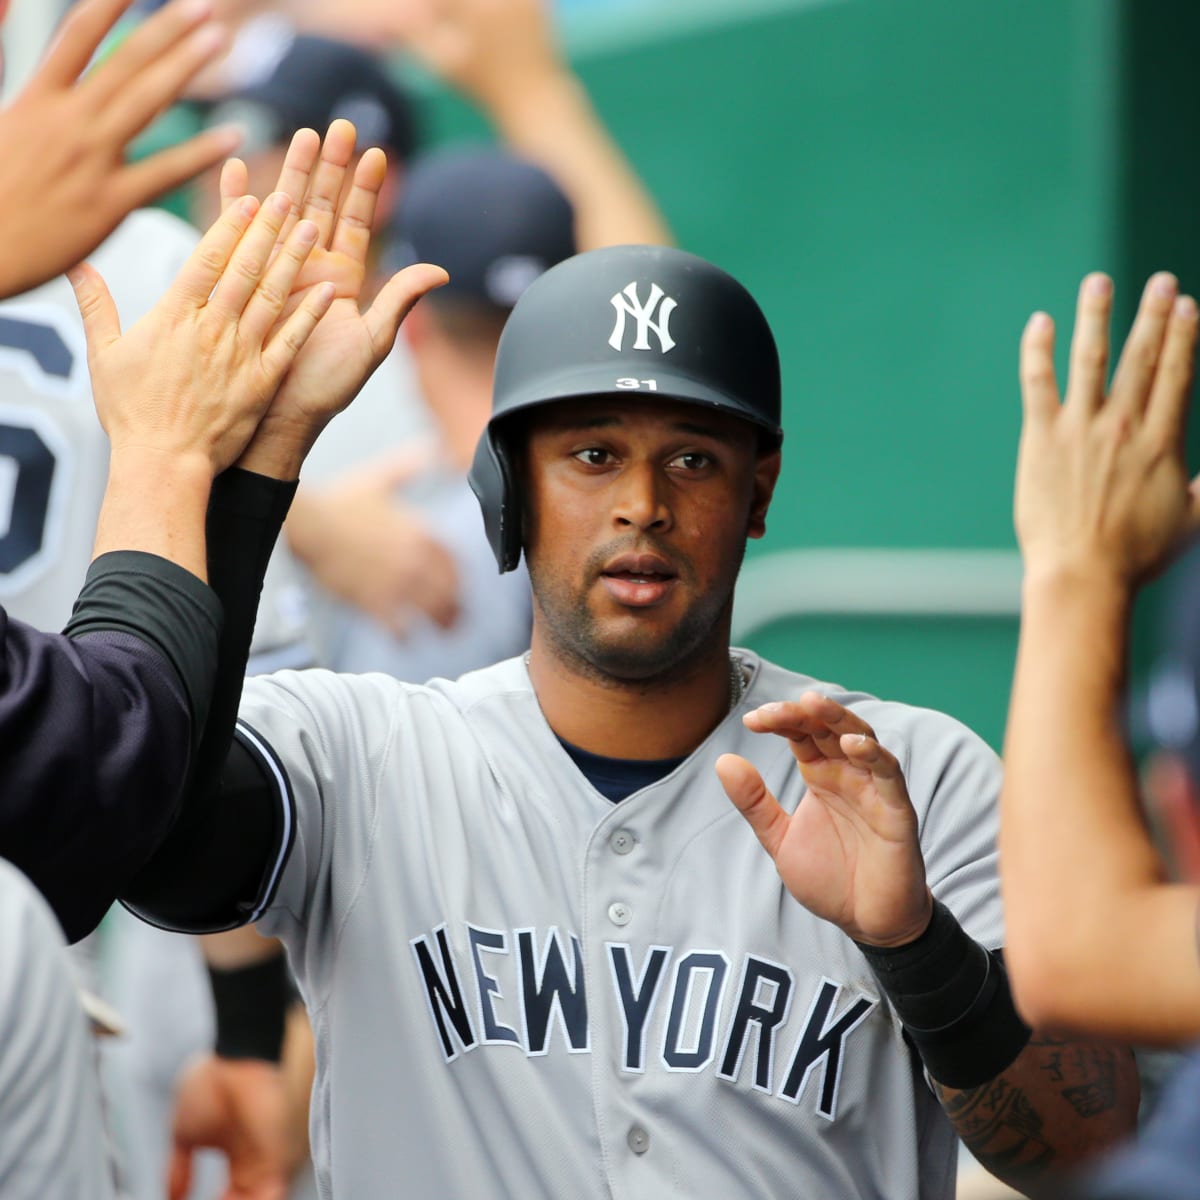 Aaron Hicks 'ready to play' after Tommy John surgery when MLB season starts